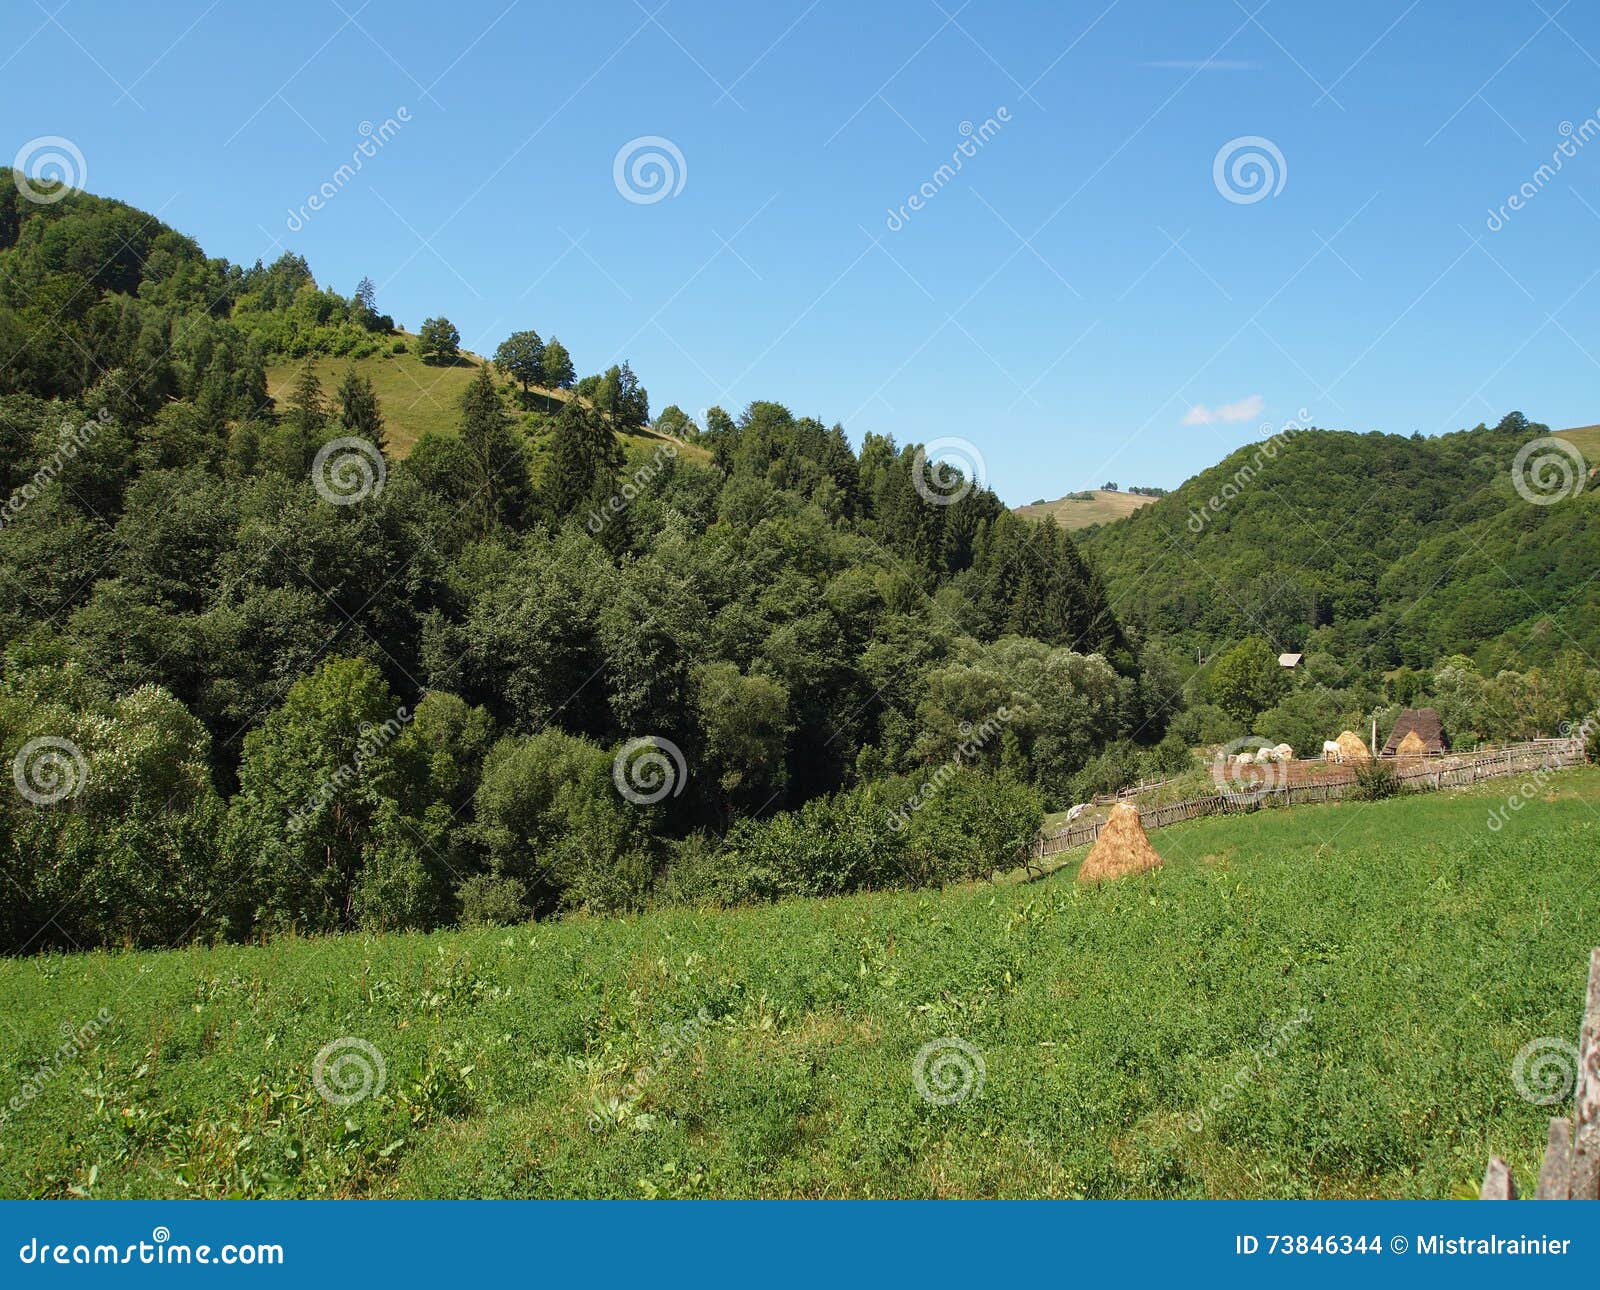 Mountain Meadow Grass And Pine Forest Stock Photo - Image ...